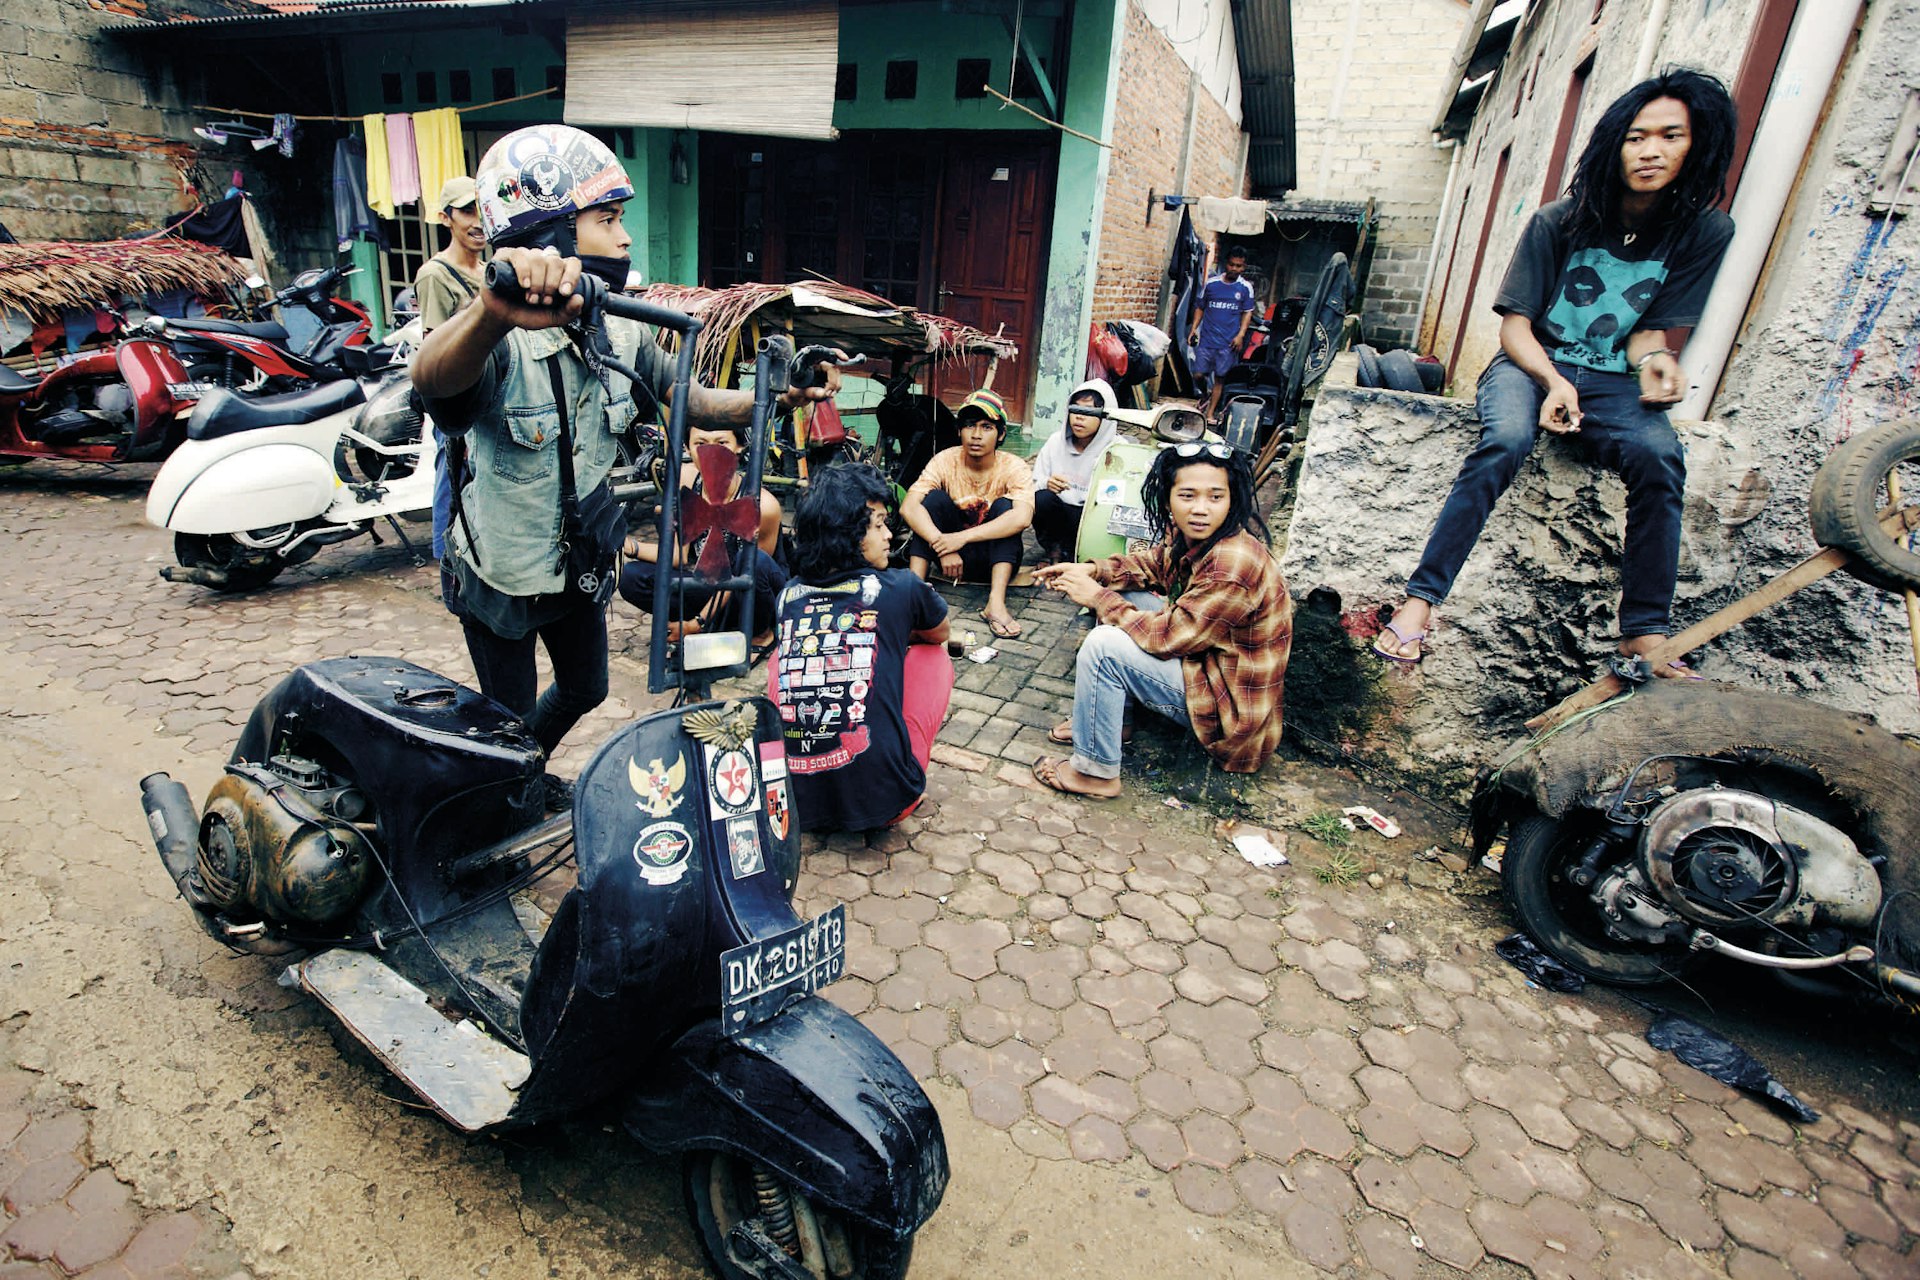 In Jakarta Indonesia, the DIY vespa scene is seriously punk